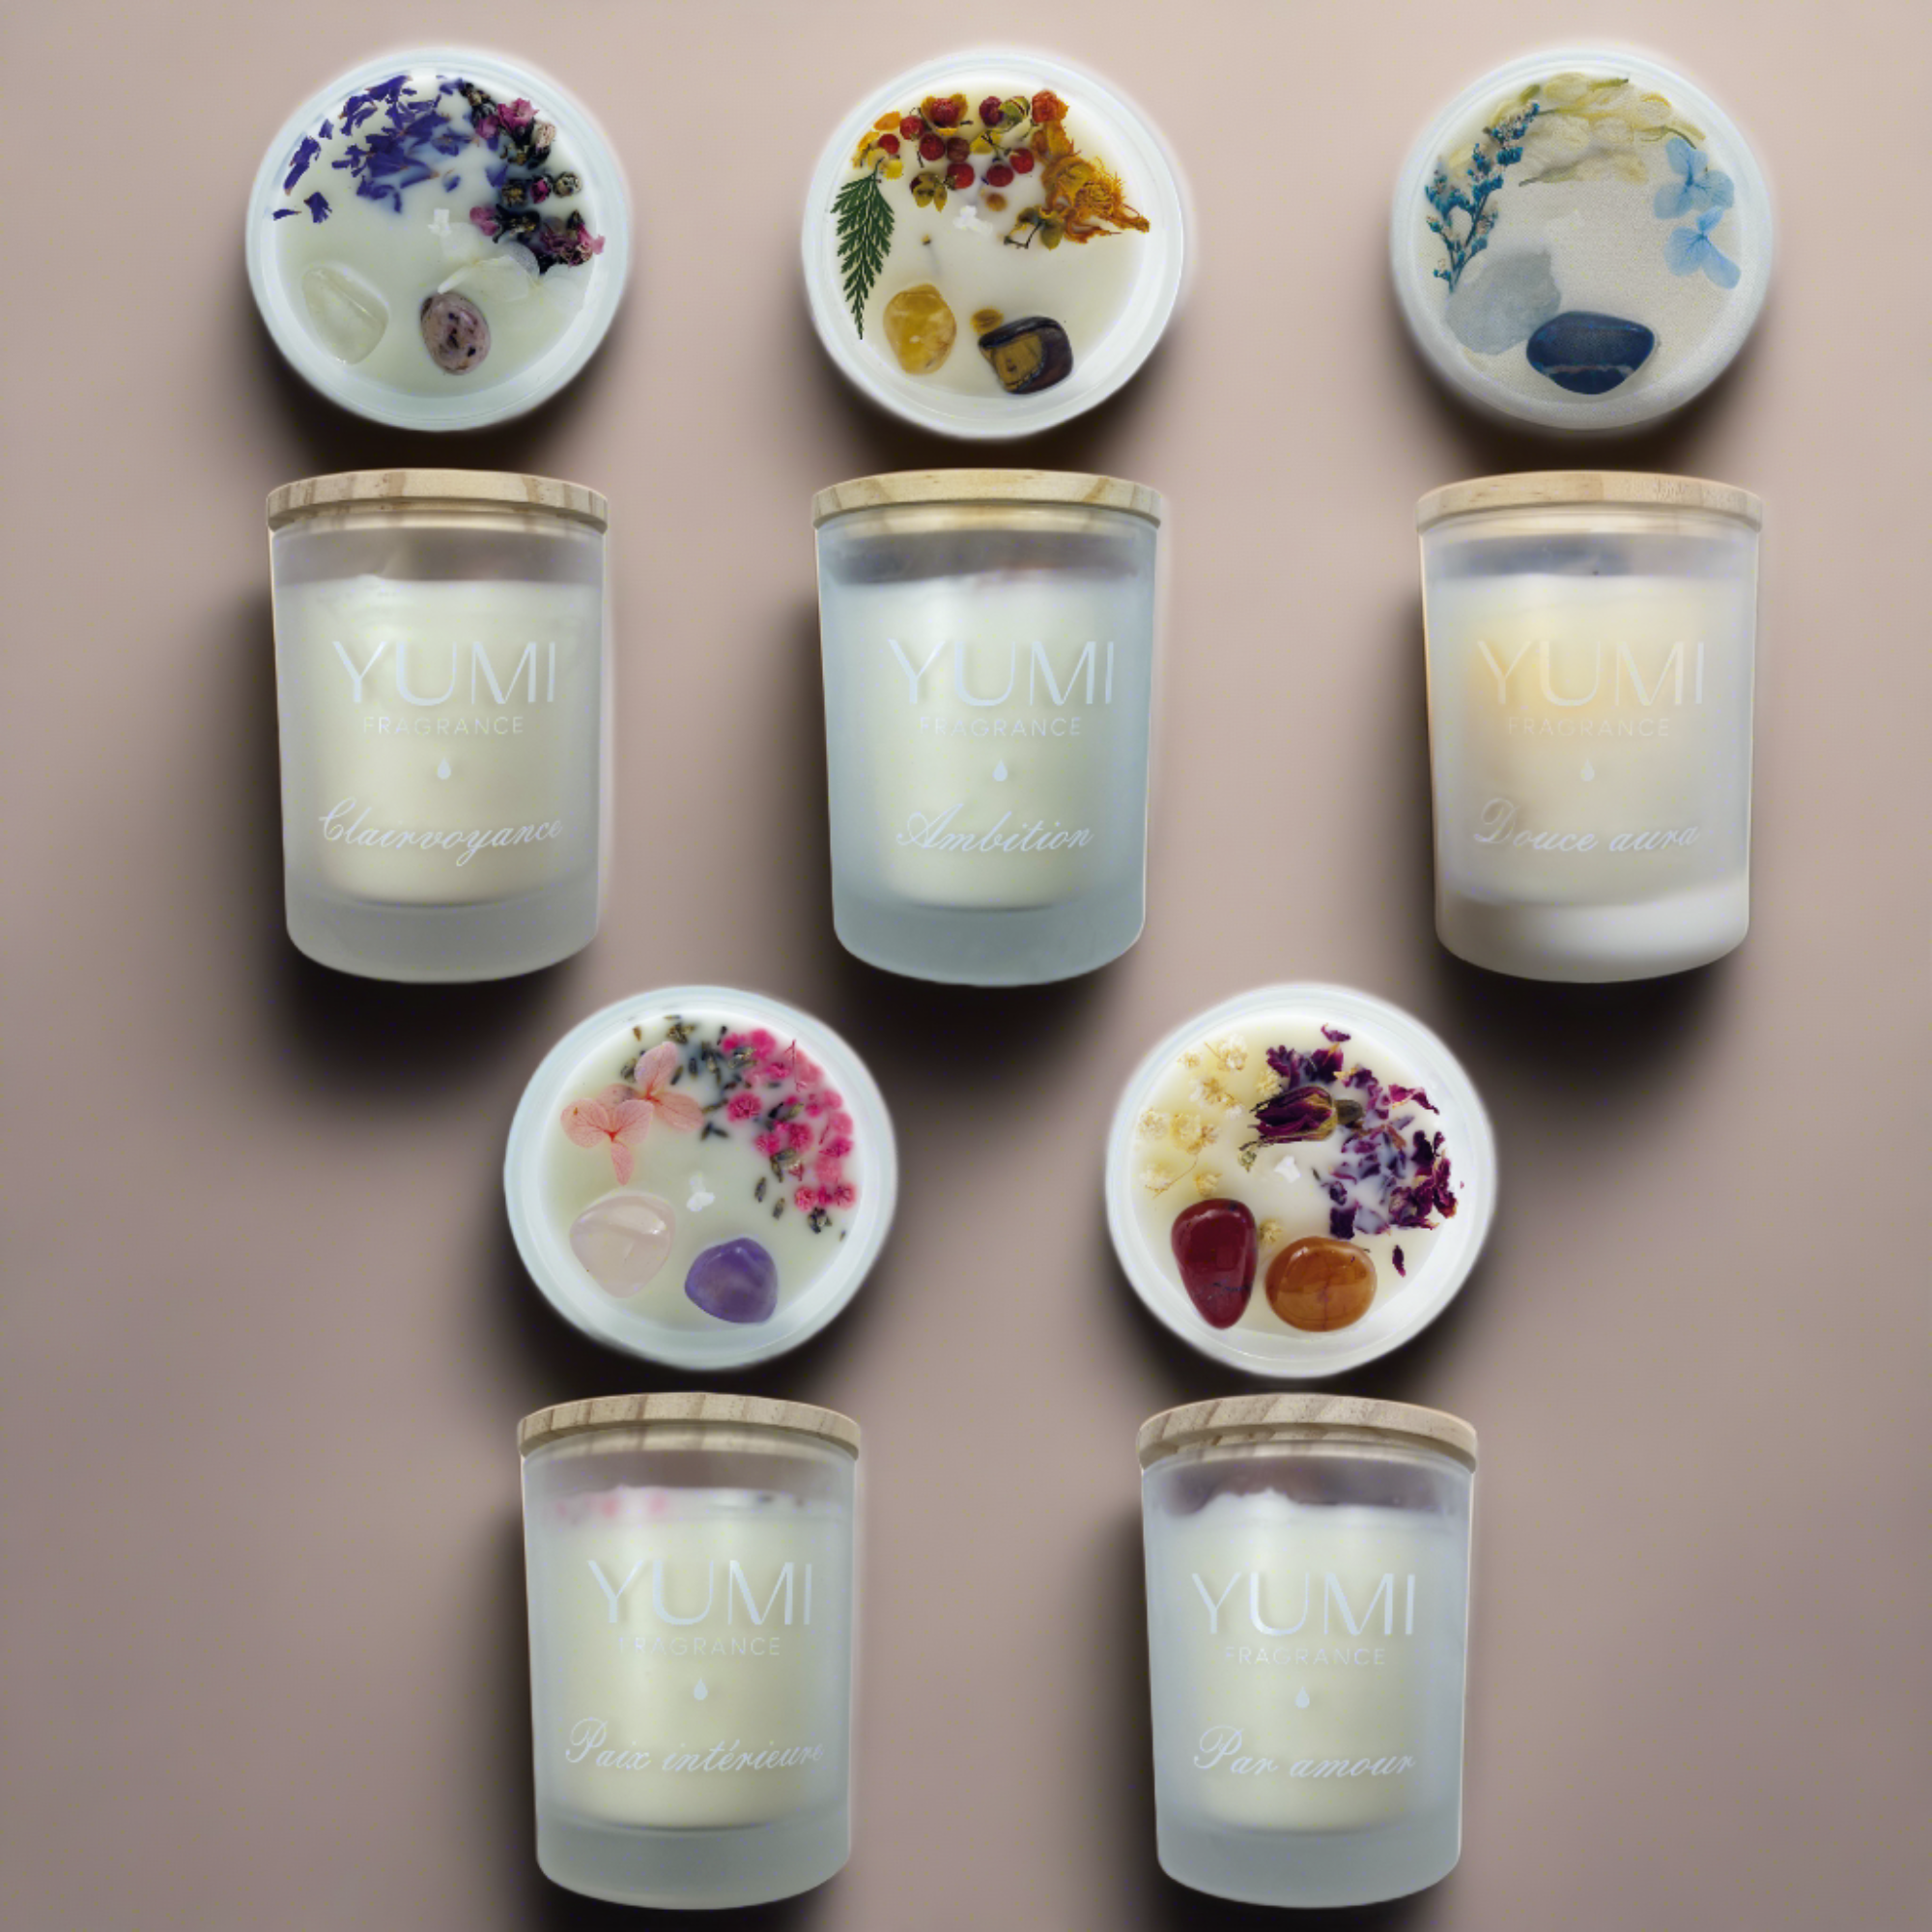 Yumi Fragrance Mood Candle Collection